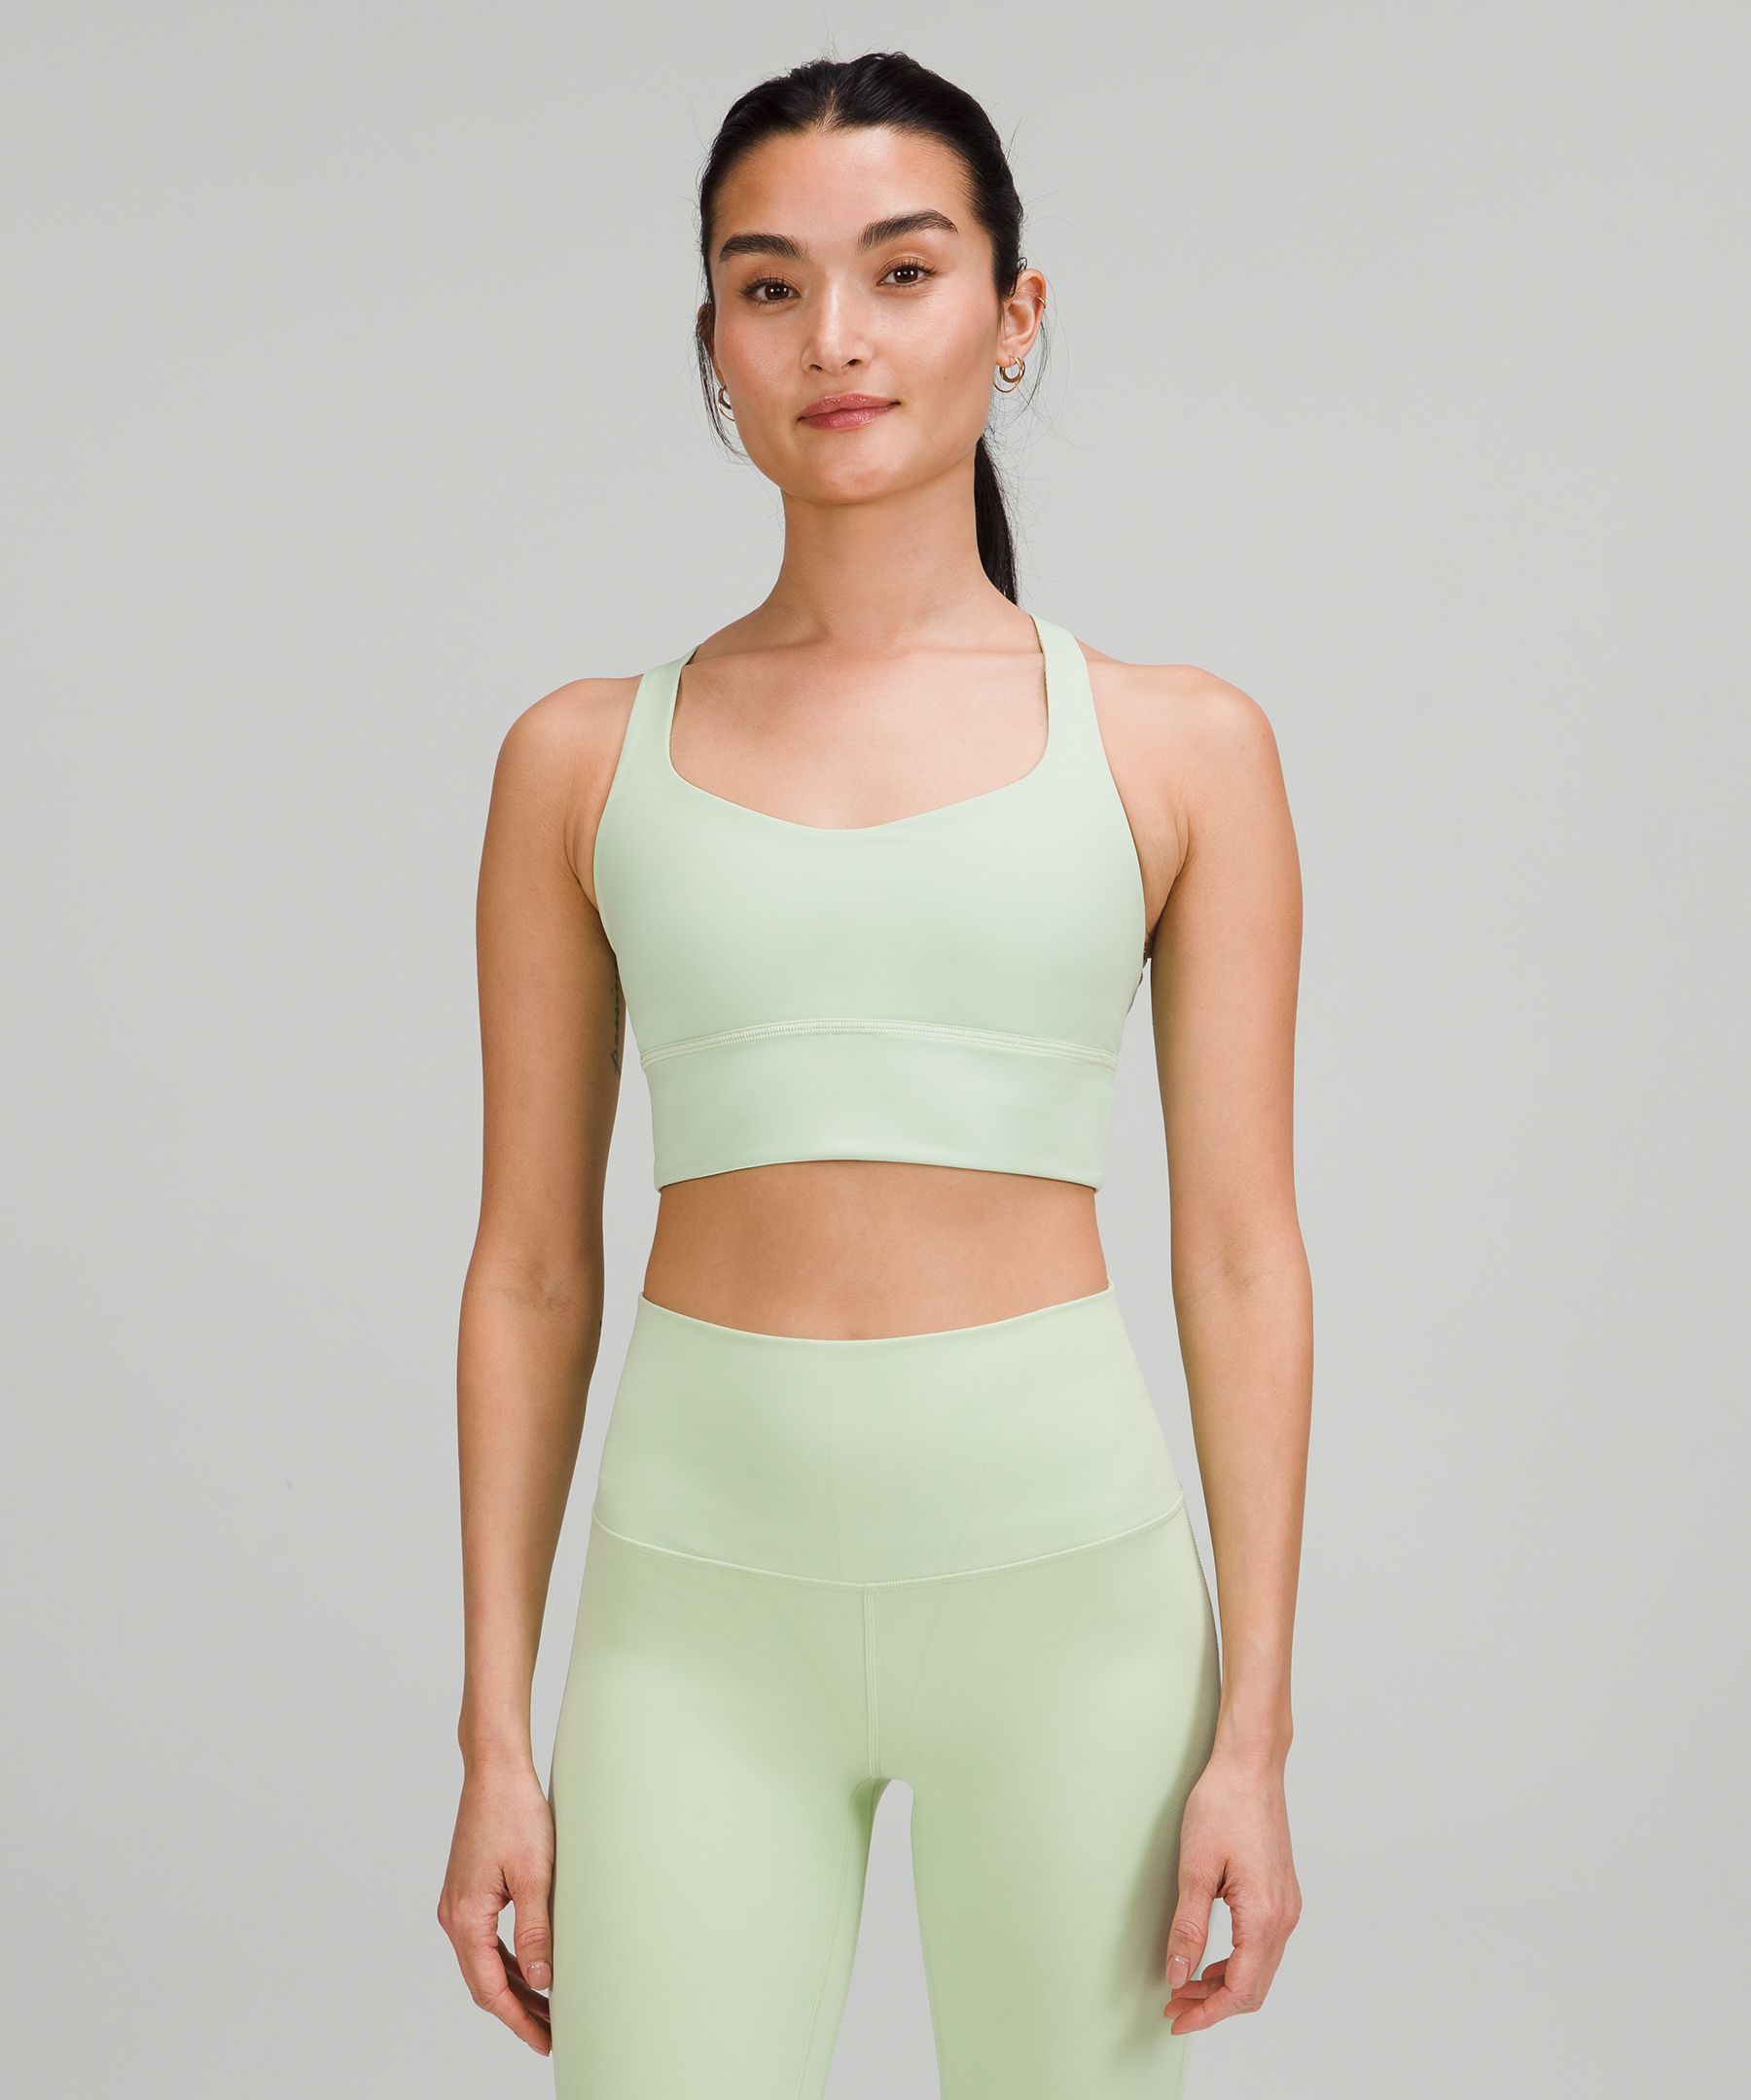 Lululemon Wild Light Support, A/b Cup In Creamy Mint